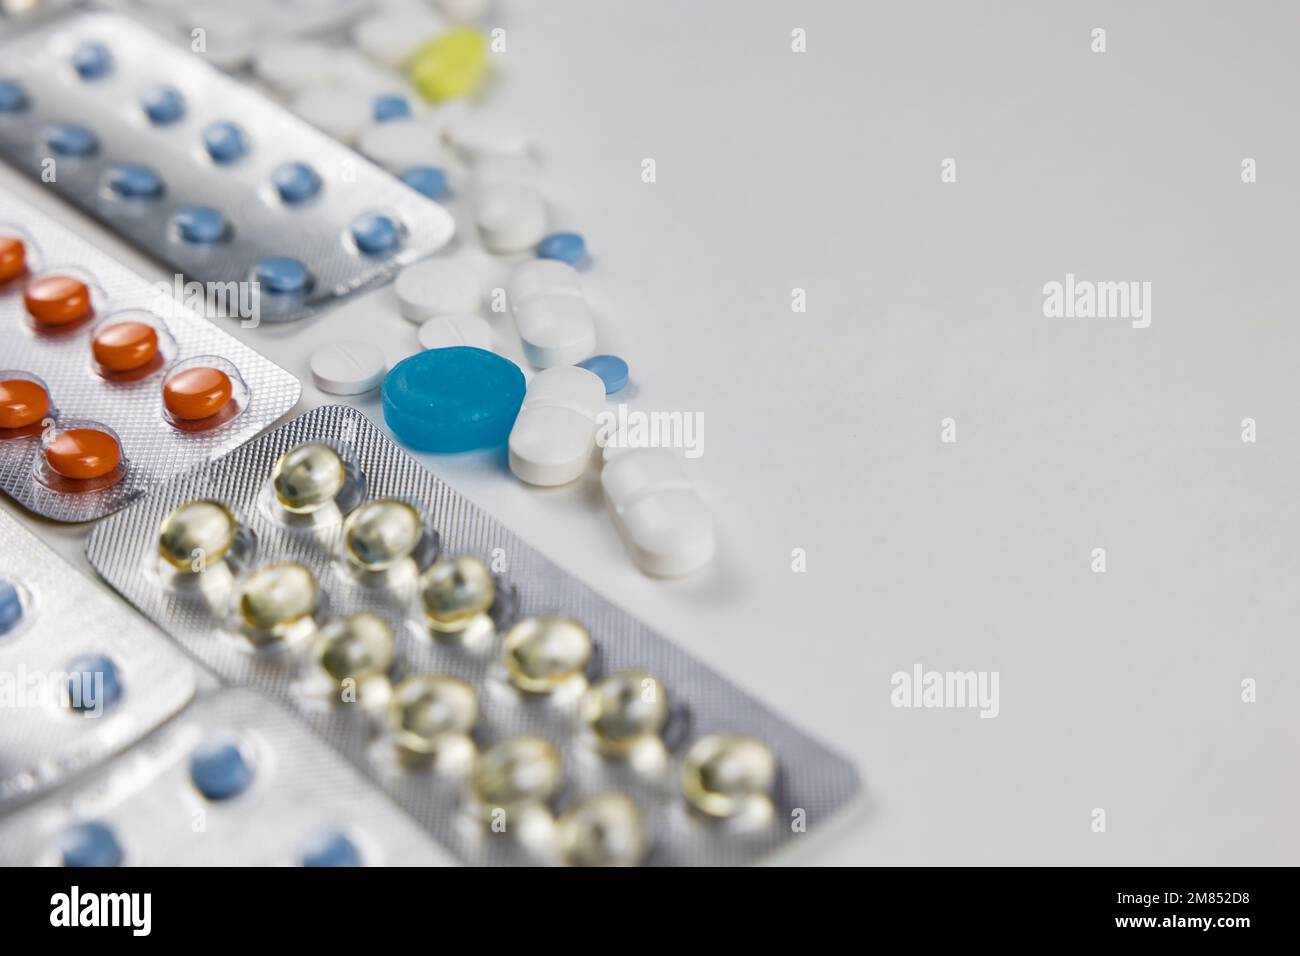 Pills or medicines background photo. Tablets and pills in the plastic blisters. Healthcare or medical concept photo with copy space. Stock Photo